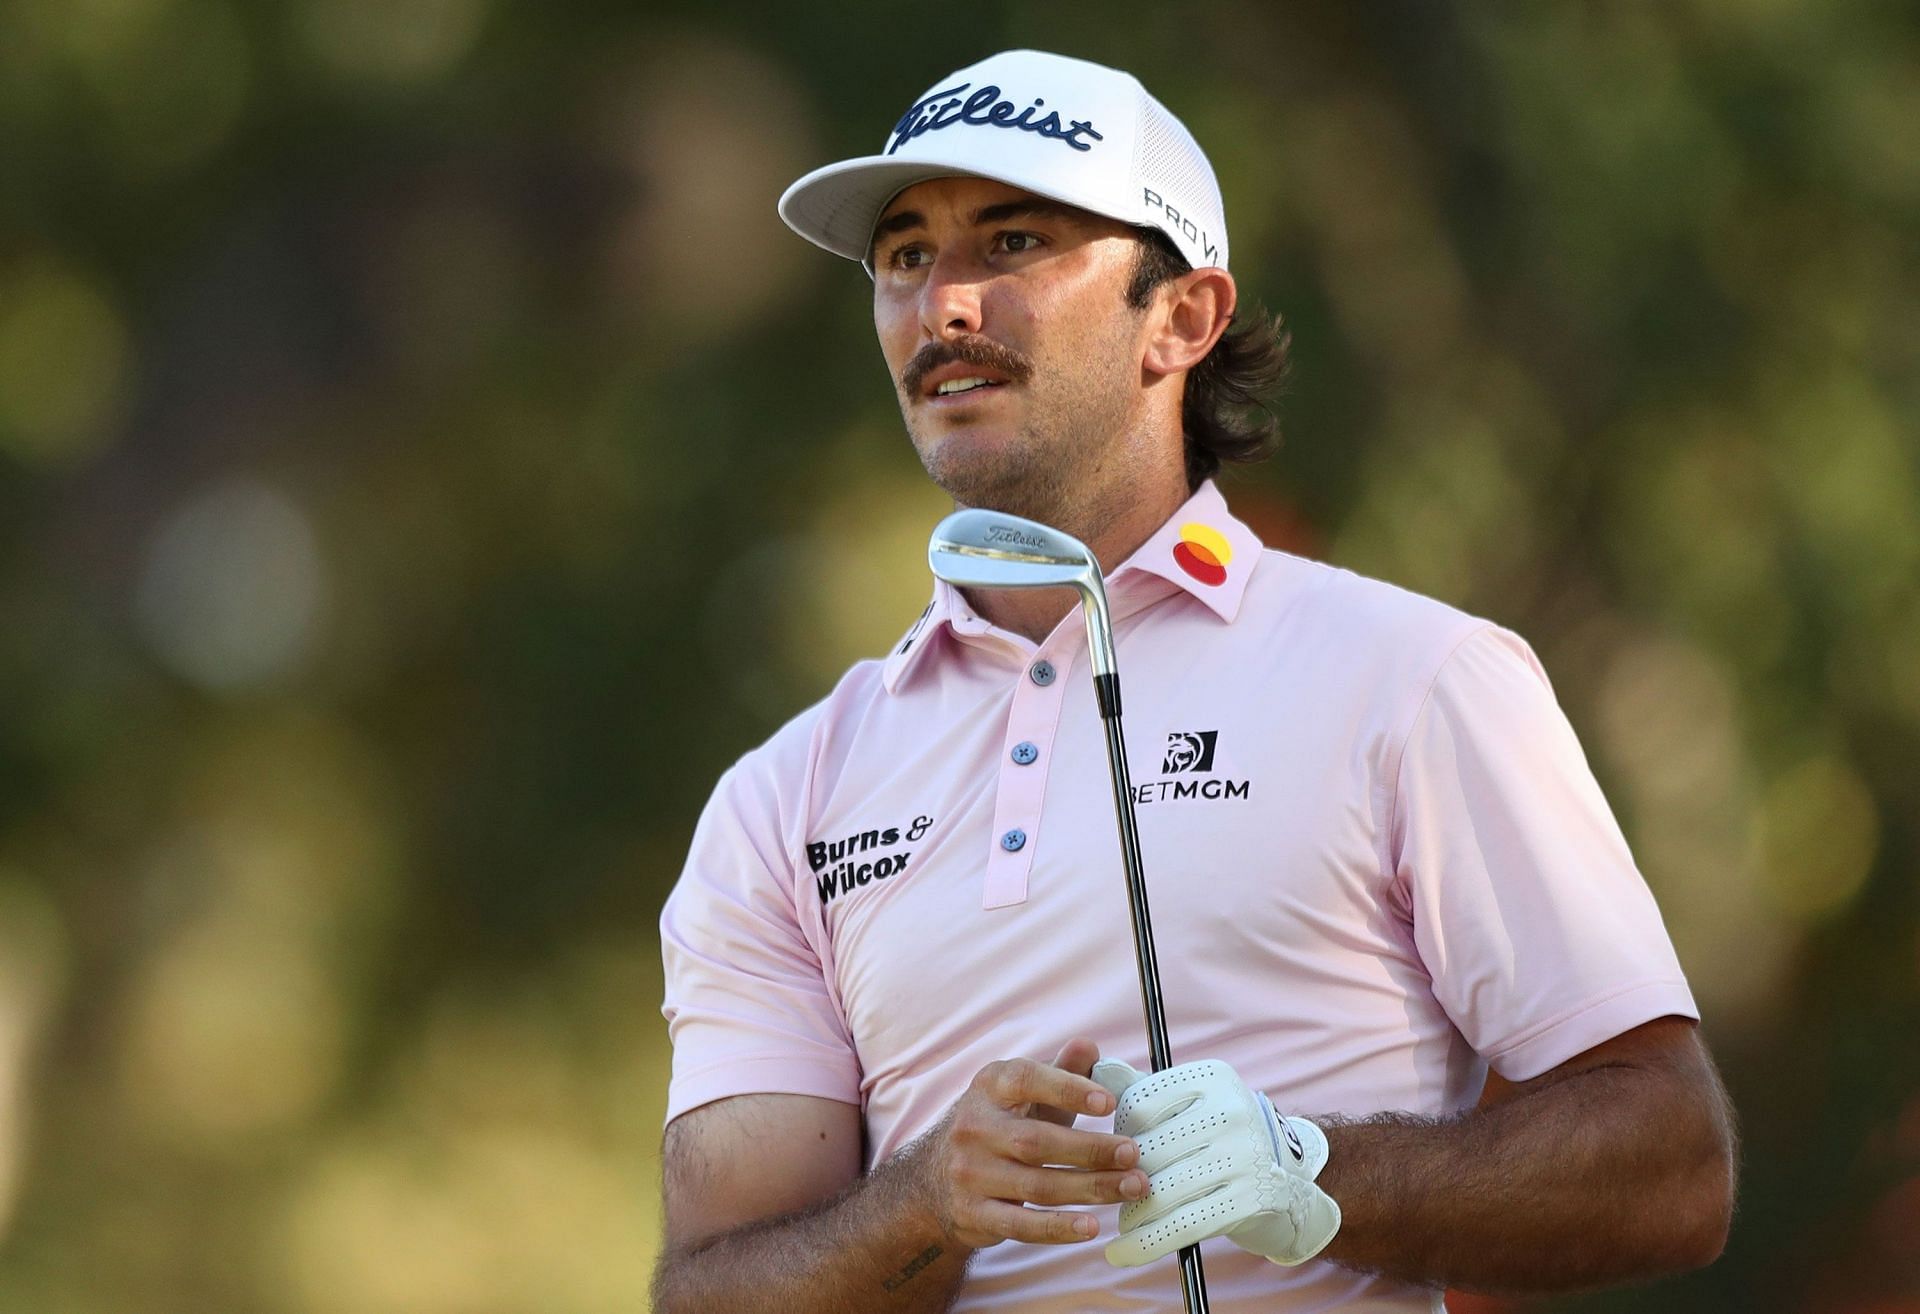 Max Homa gets micd up at the Farmers Insurance Open to increase fans viewing experience